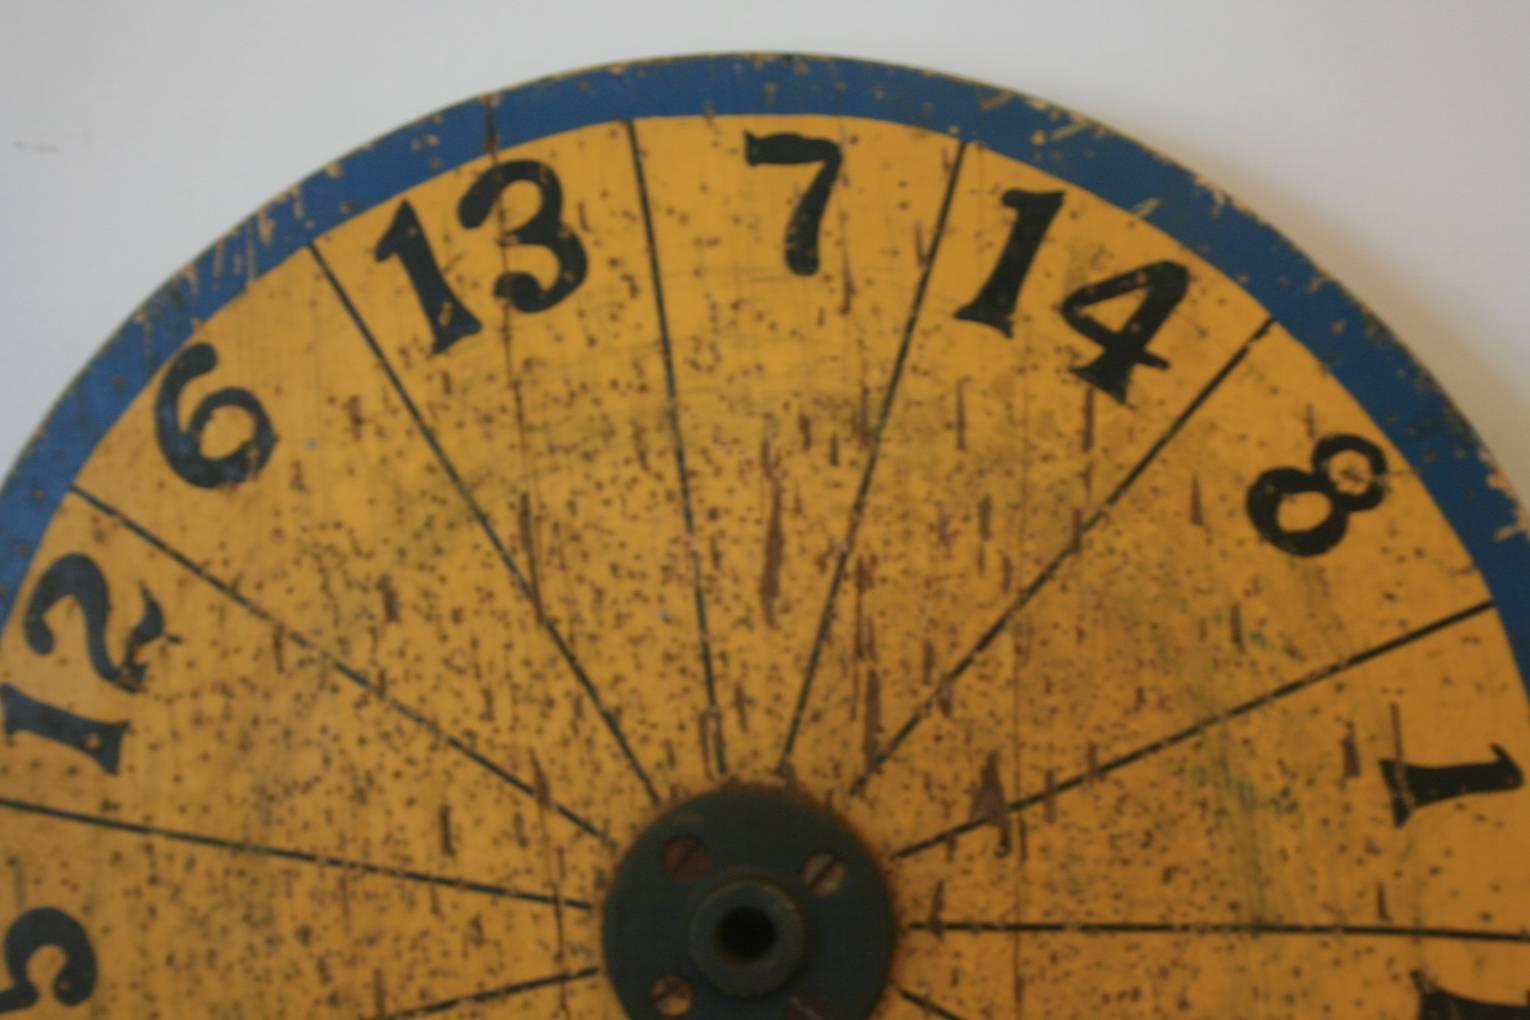 Great yellow and blue dart board, circa 1900. Great unusual colors on this Folk Art dart board. Measures: 18 inch diameter and about 1 1/2 inches thick. A beautiful piece of Americana. It has seen a lot of use over the years which adds to its